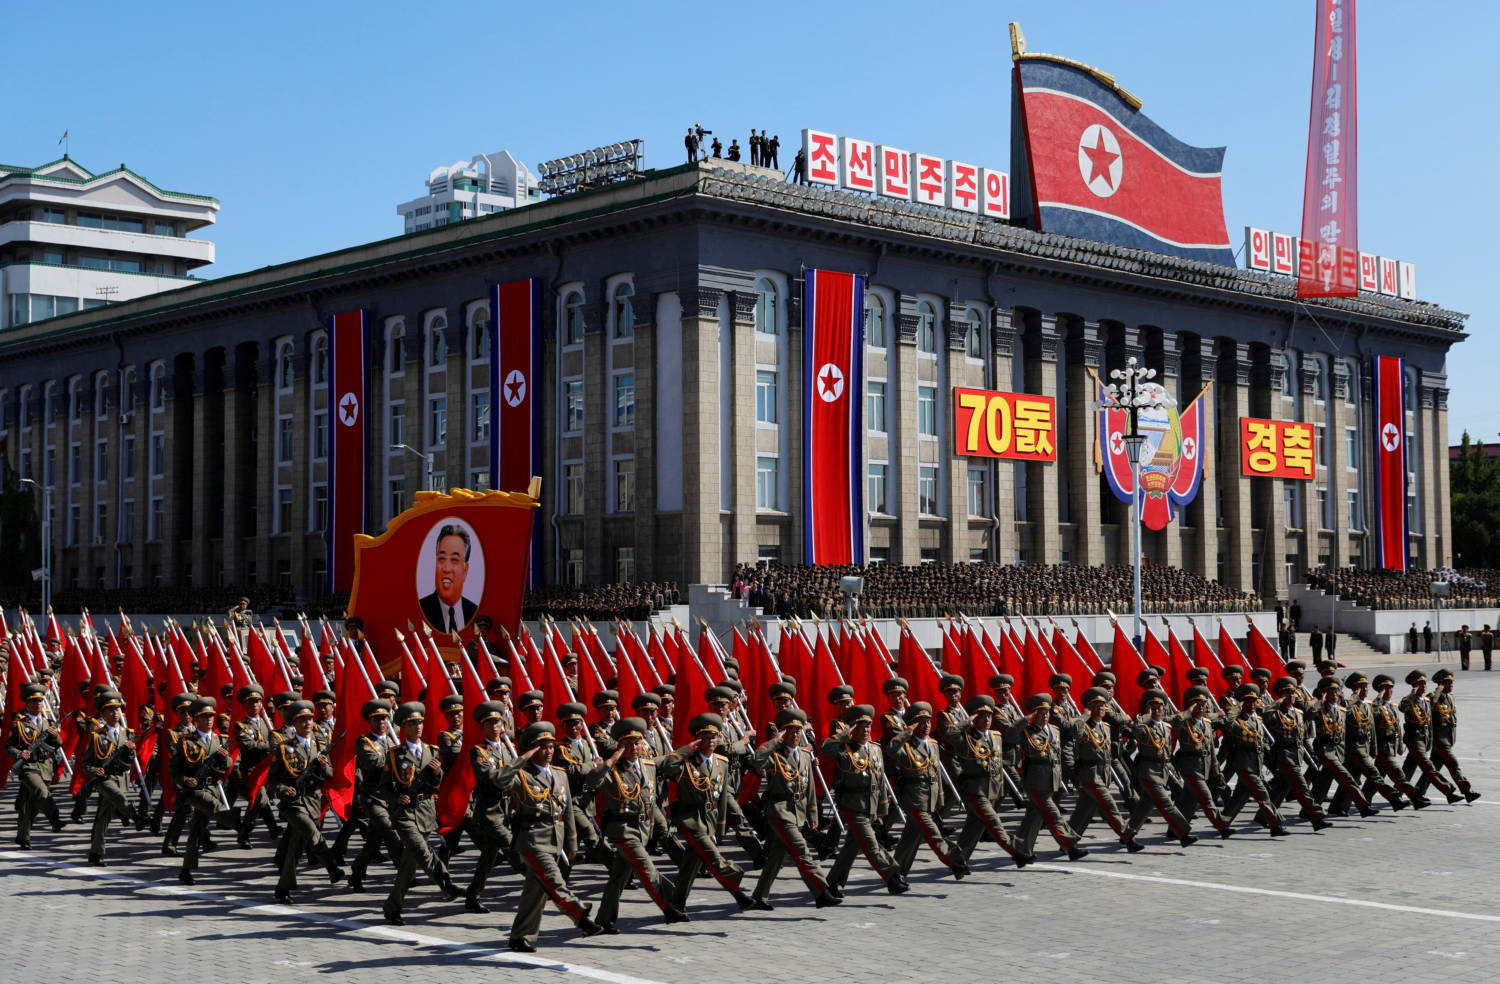 File Photo: Soldiers March With The Portrait Of North Korean Founder Kim Il Sung During A Military Parade Marking The 70th Anniversary Of Country's Foundation In Pyongyang